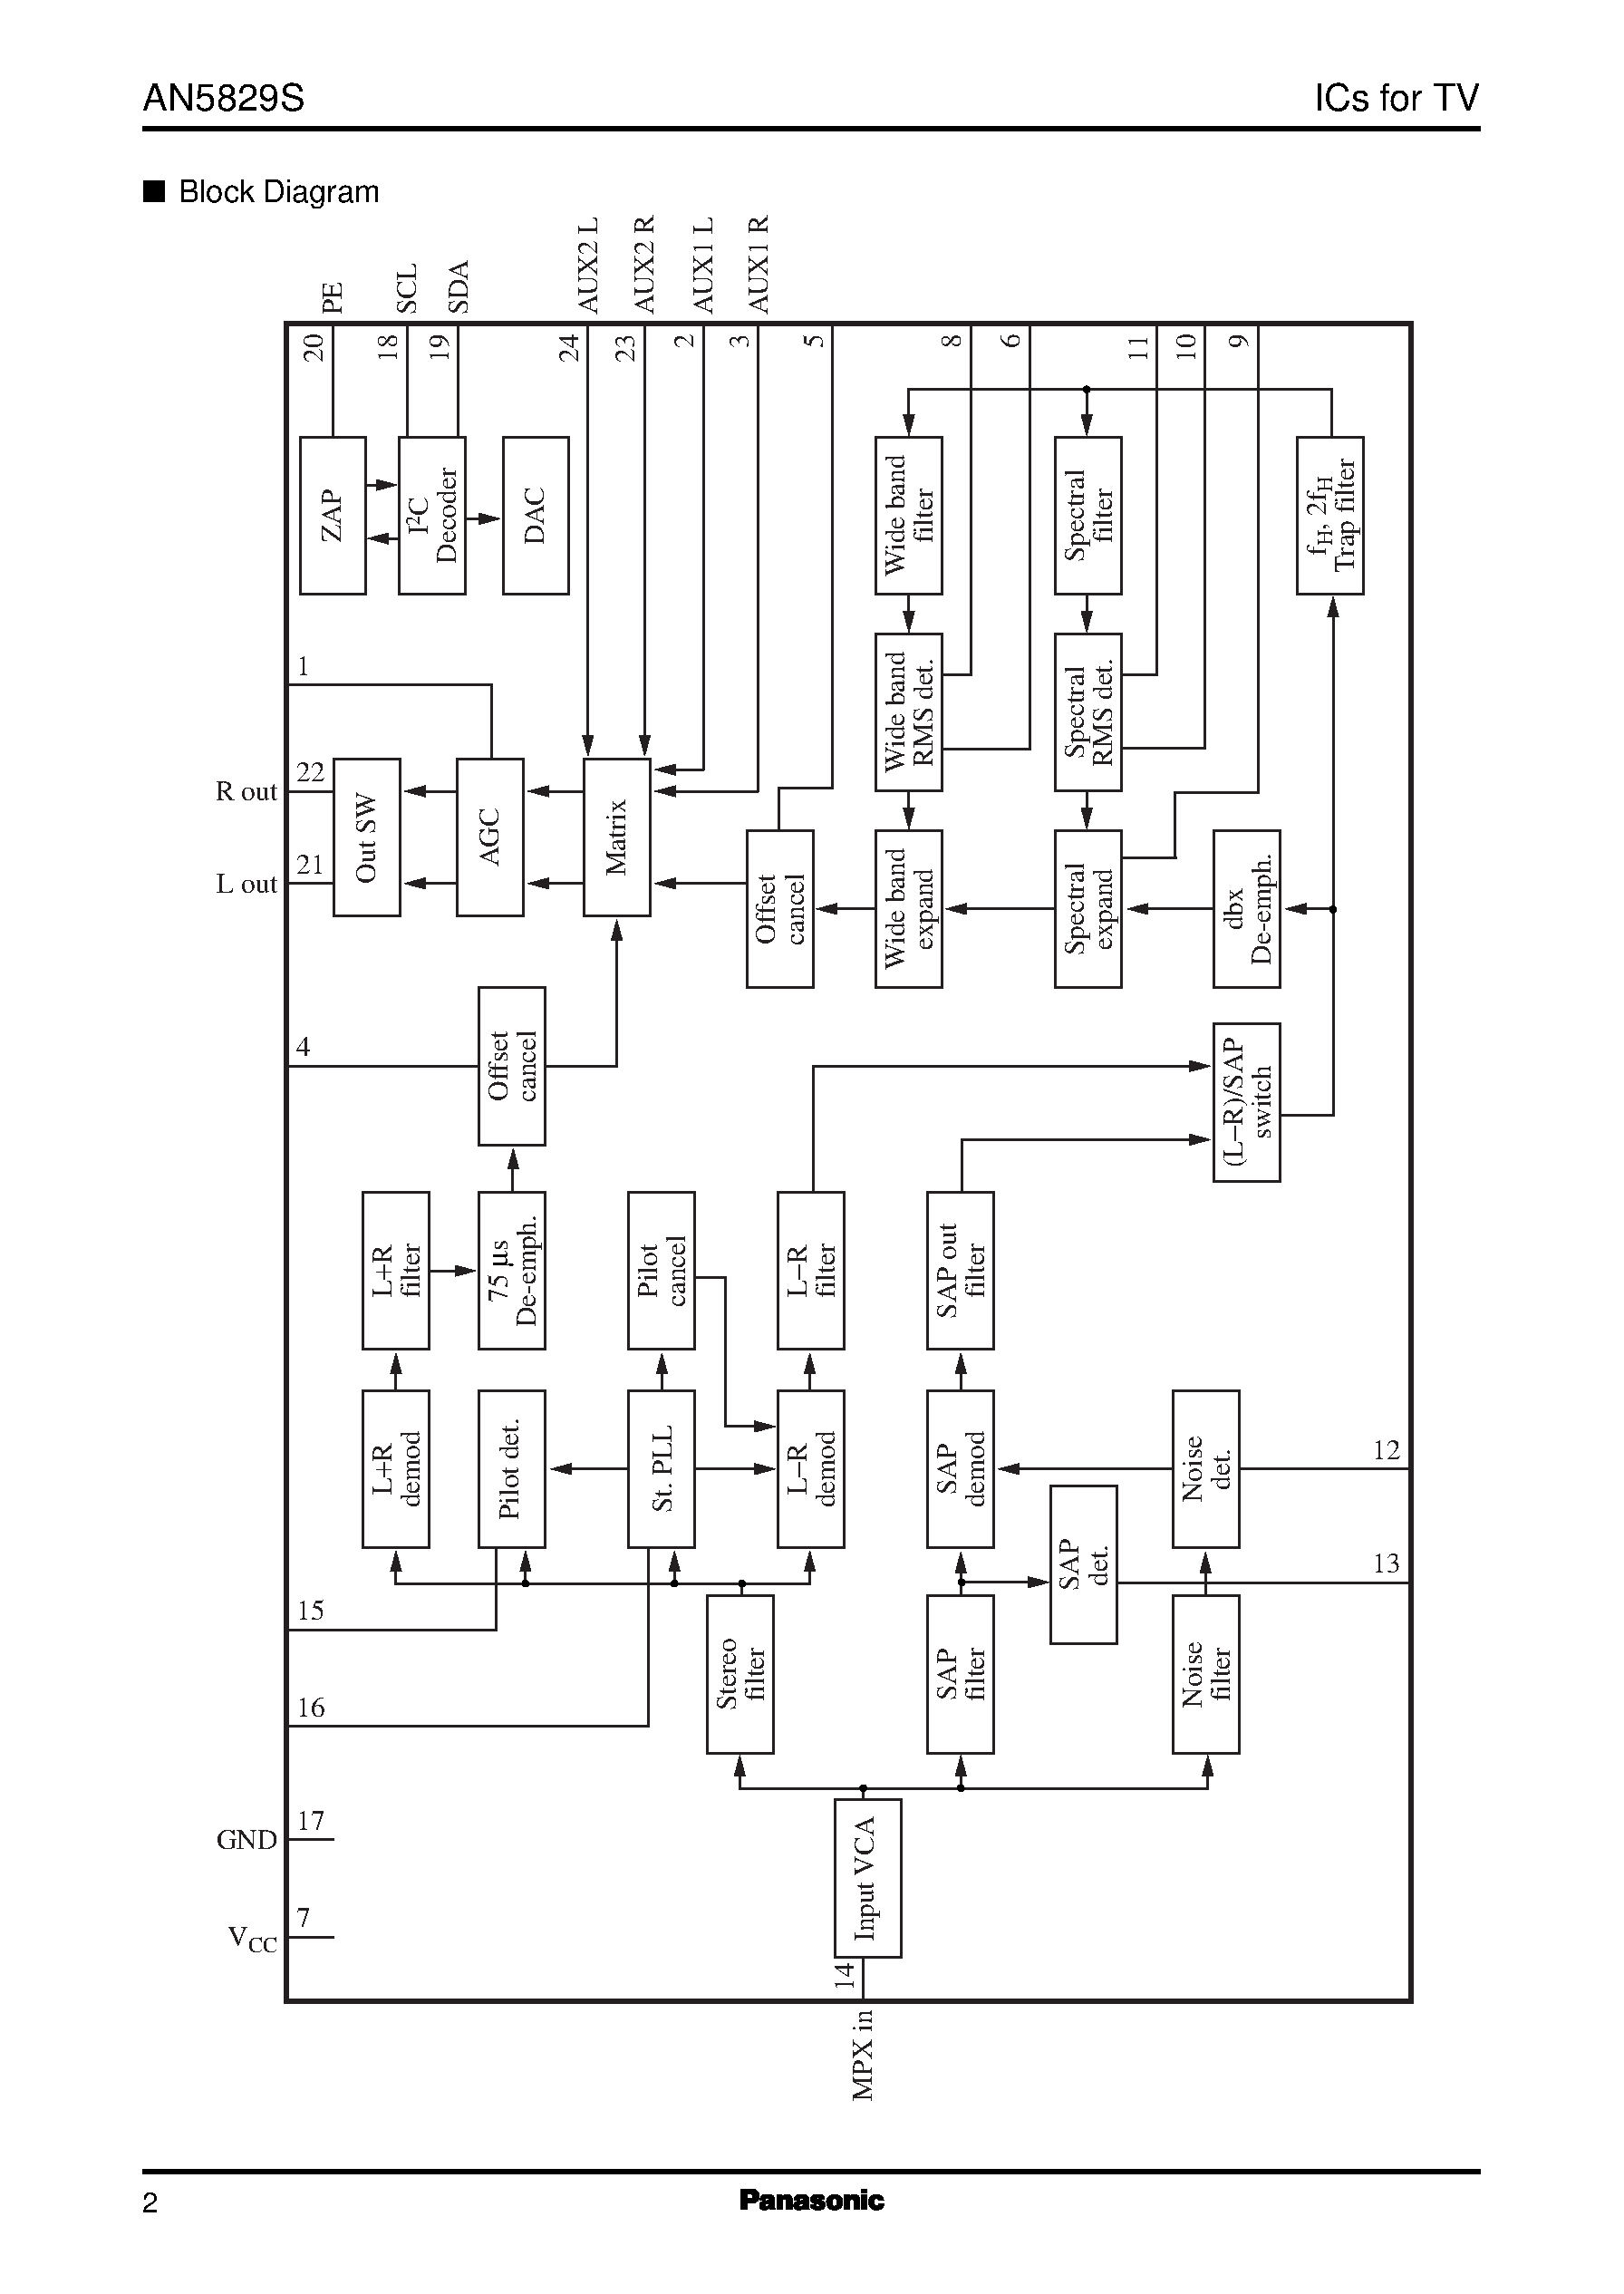 Datasheet AN5829S - Sound multiplex decoder IC for the U.S. televisions page 2